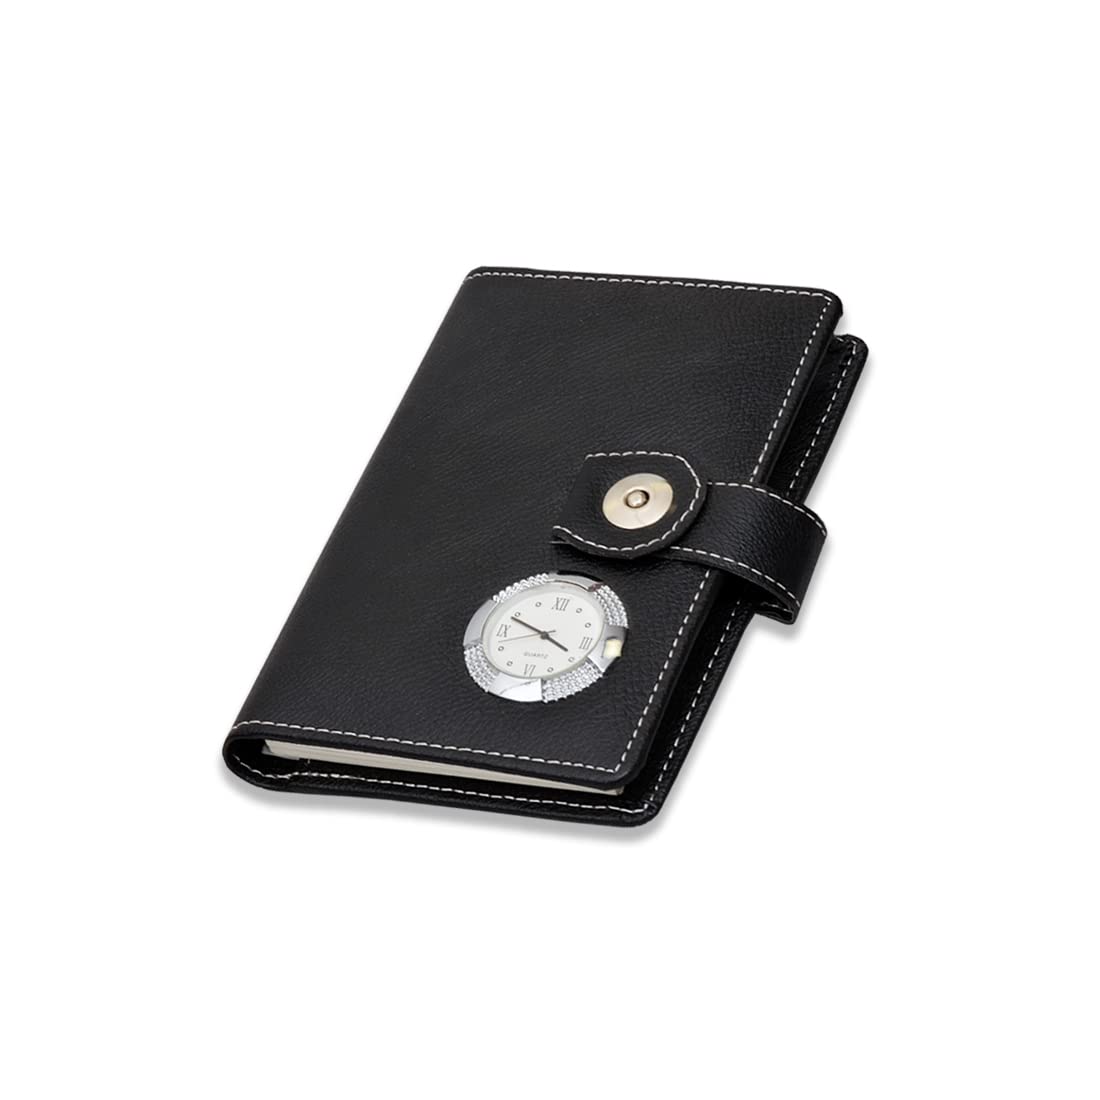 BLACK UNDATED POCKET PLANNER | Designer Faux Leather Daily, Goal - Table Diary, Card Holder, Stationery Organizer for Office going Mom and Dad with Calculator and Pen.